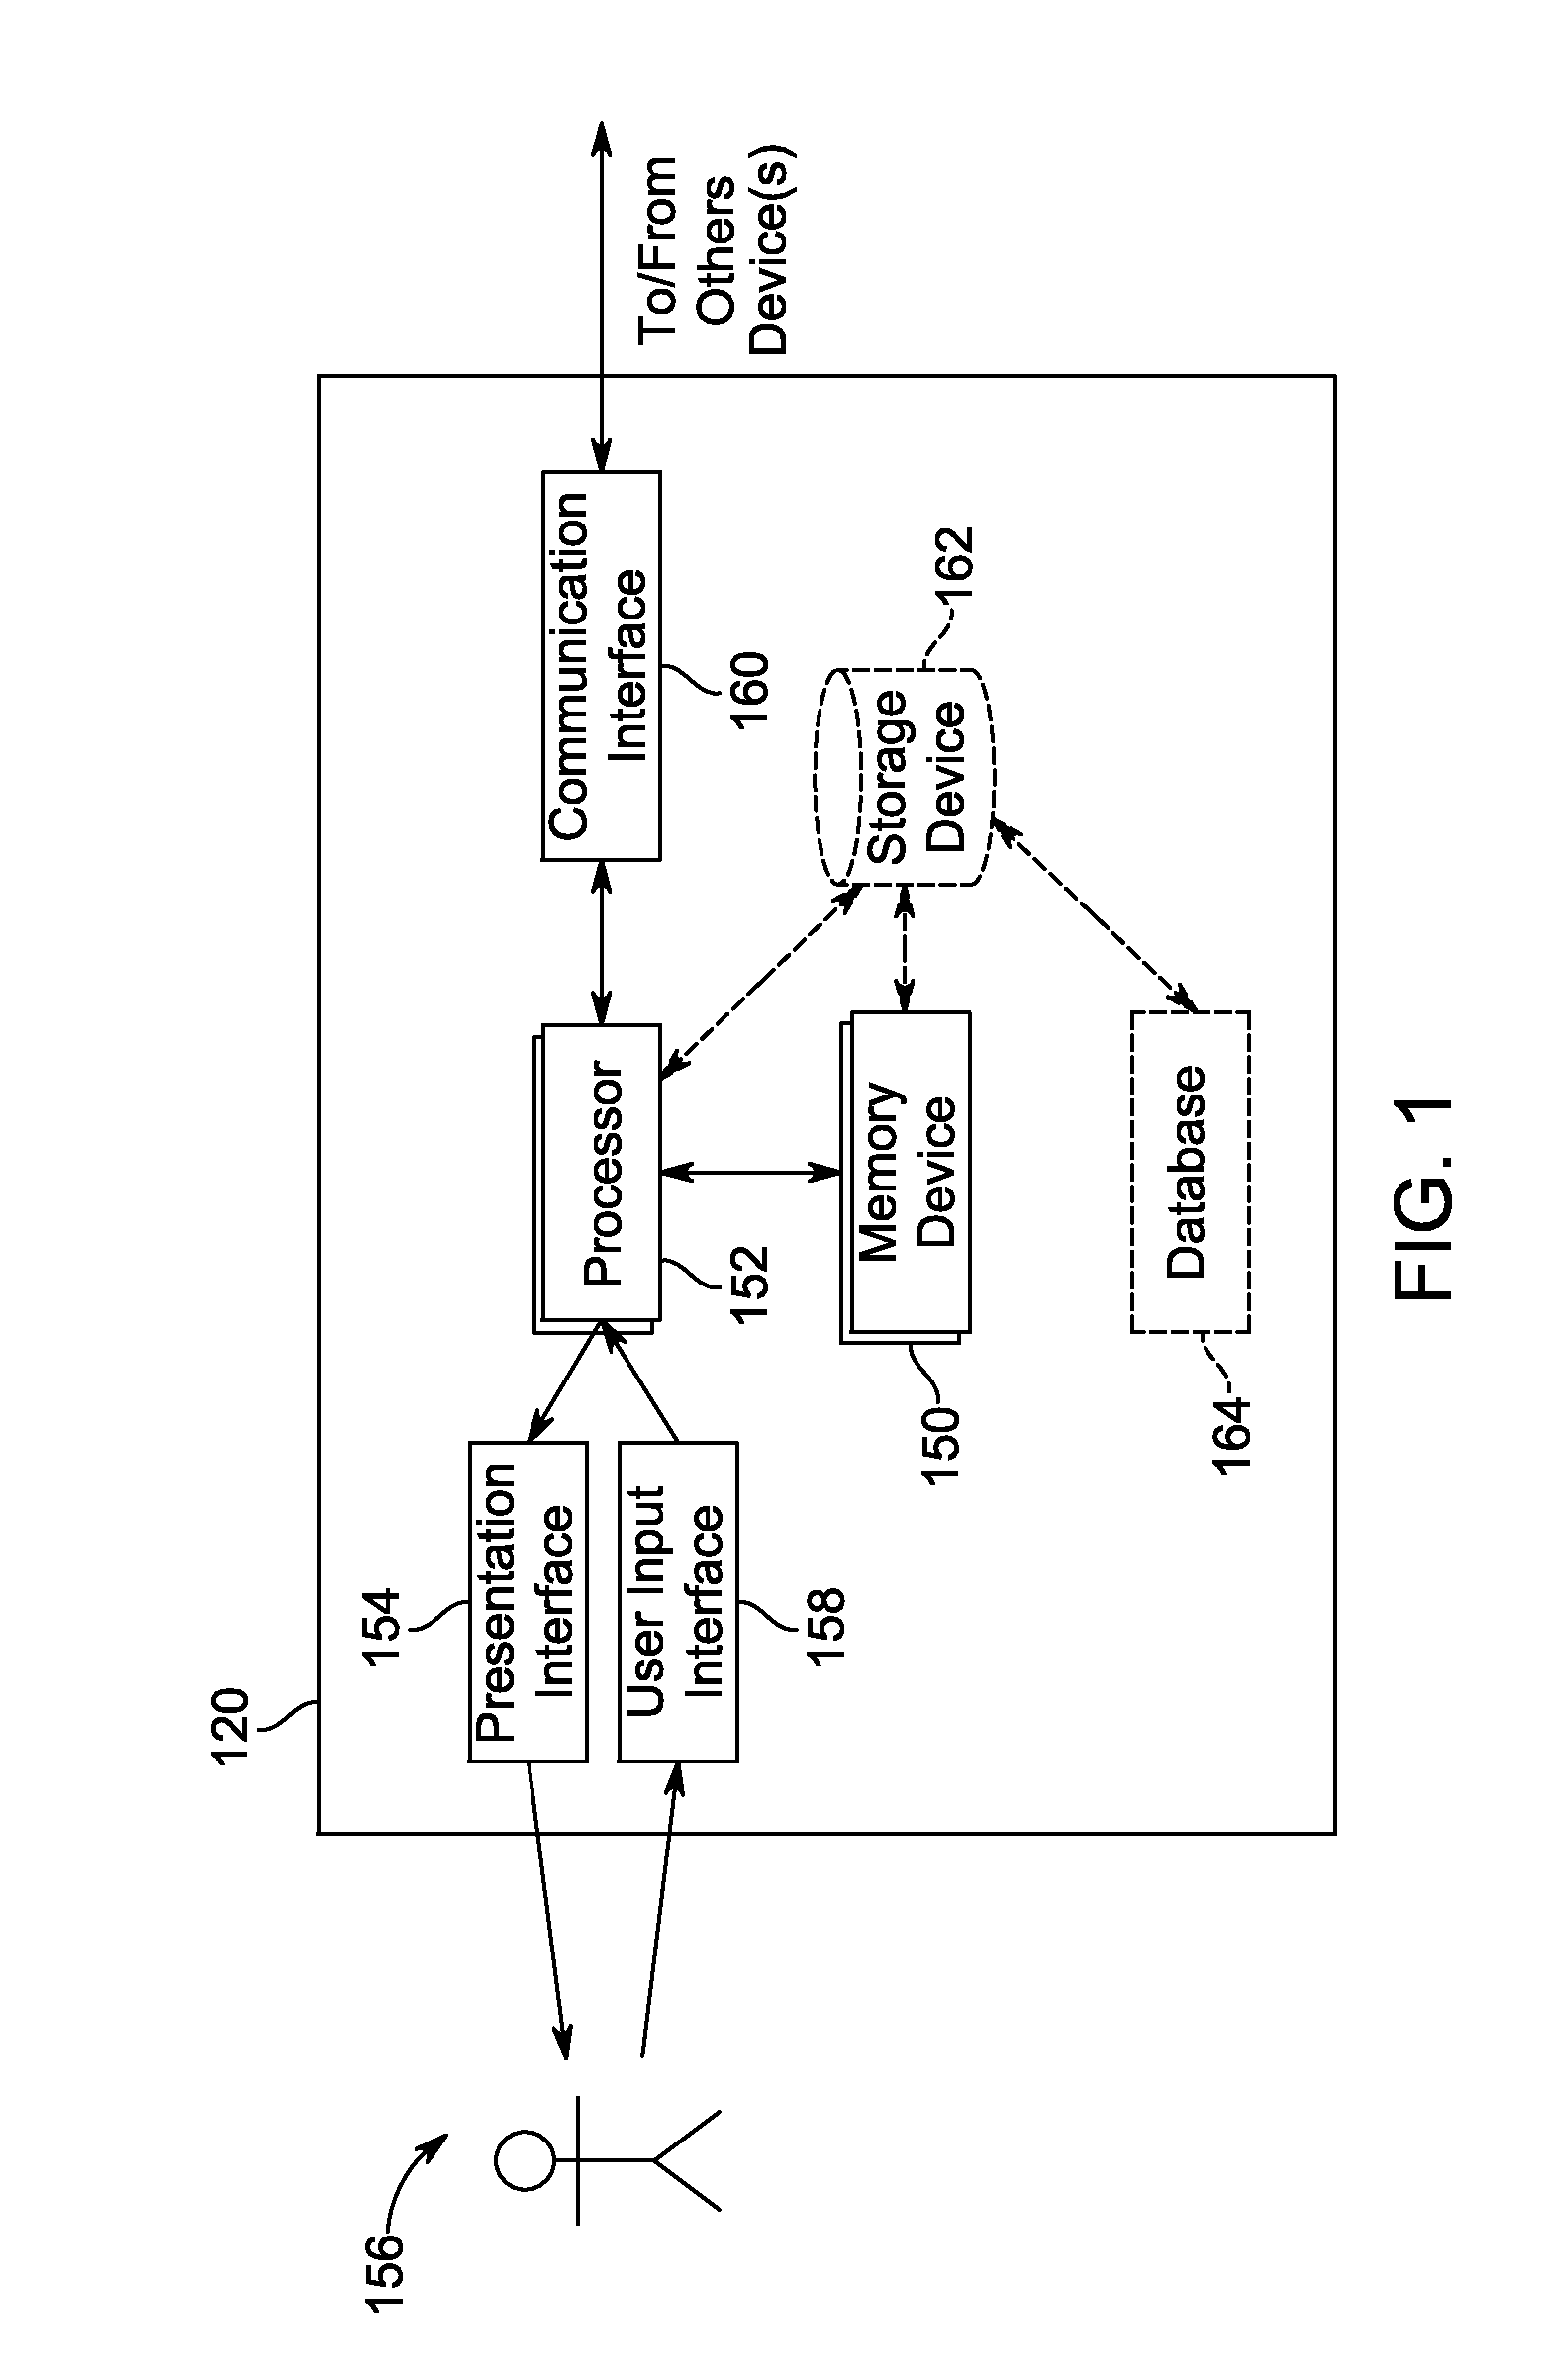 System and Method For Extracting Ontological Information From A Body Of Text